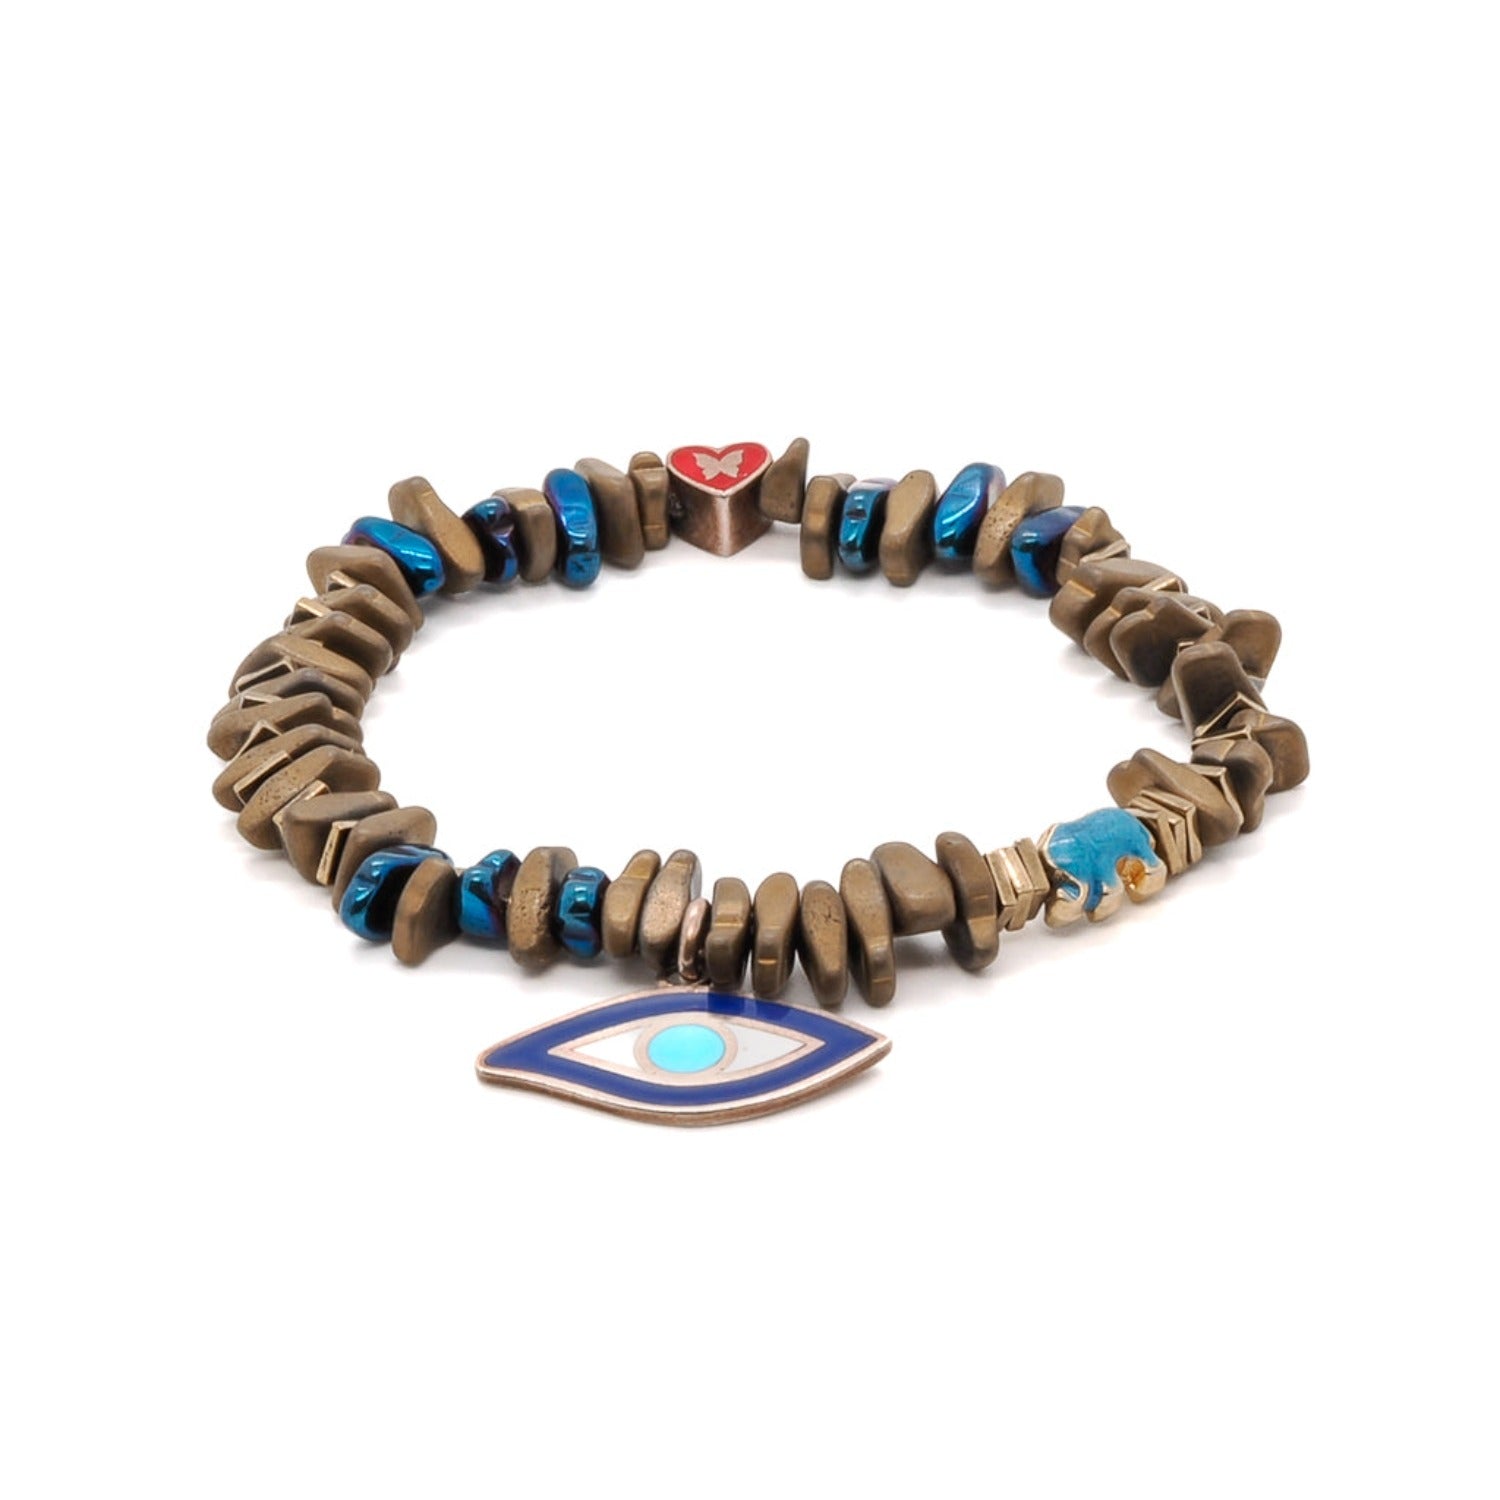 Helena Bracelet featuring gold and blue hematite stones, lucky elephant bead, butterfly accent, and evil eye charm.